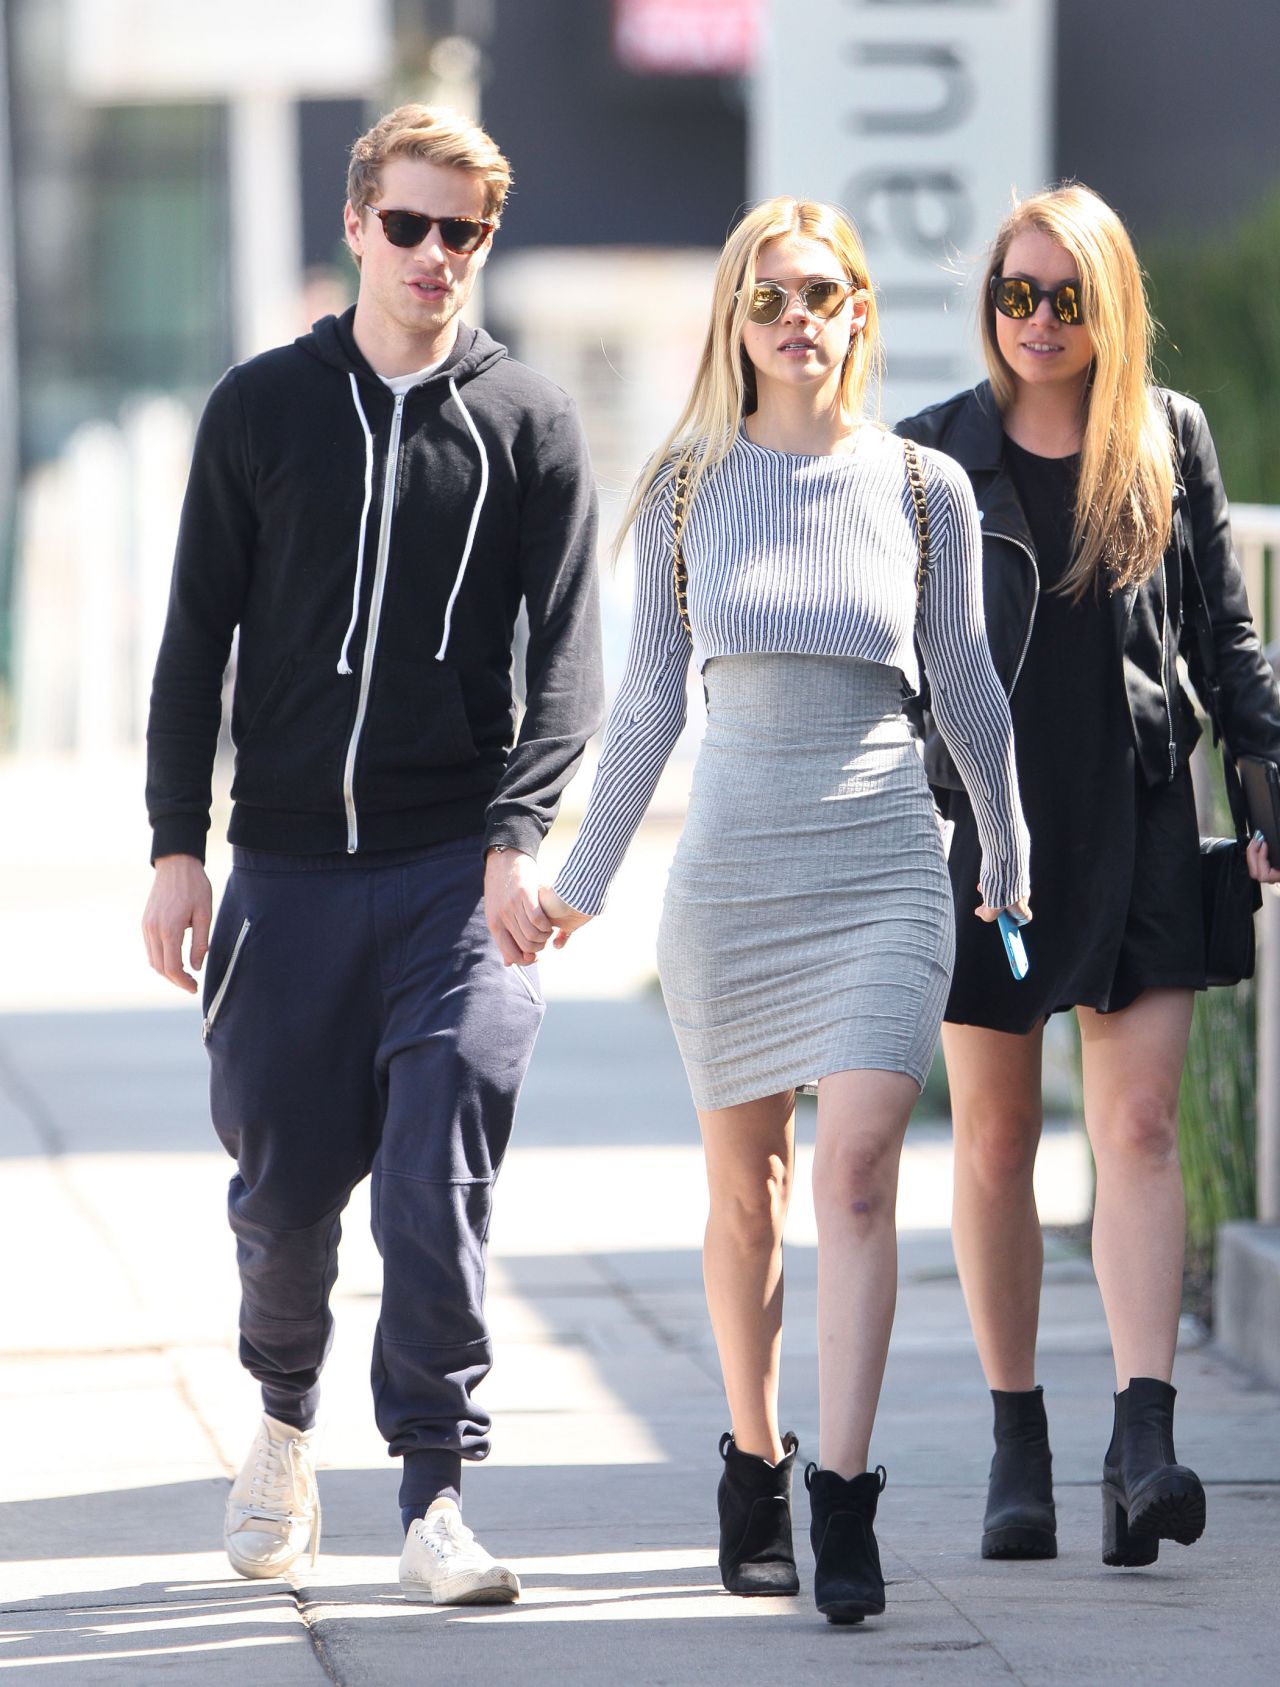 Nicola Peltz in a Tight Grey Dress - Out With Friends in West Hollywood ...